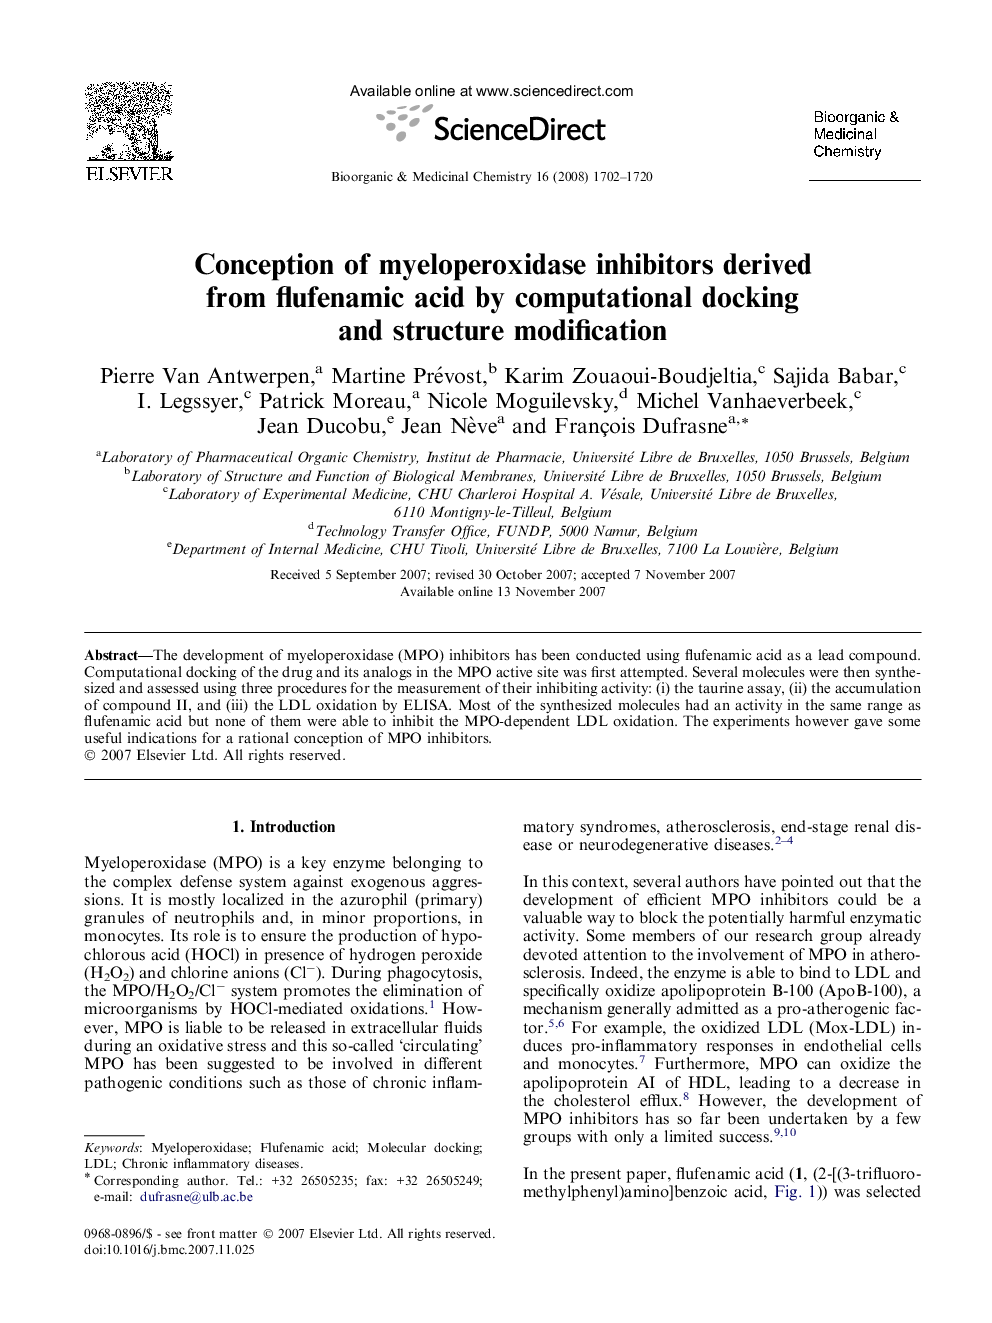 Conception of myeloperoxidase inhibitors derived from flufenamic acid by computational docking and structure modification